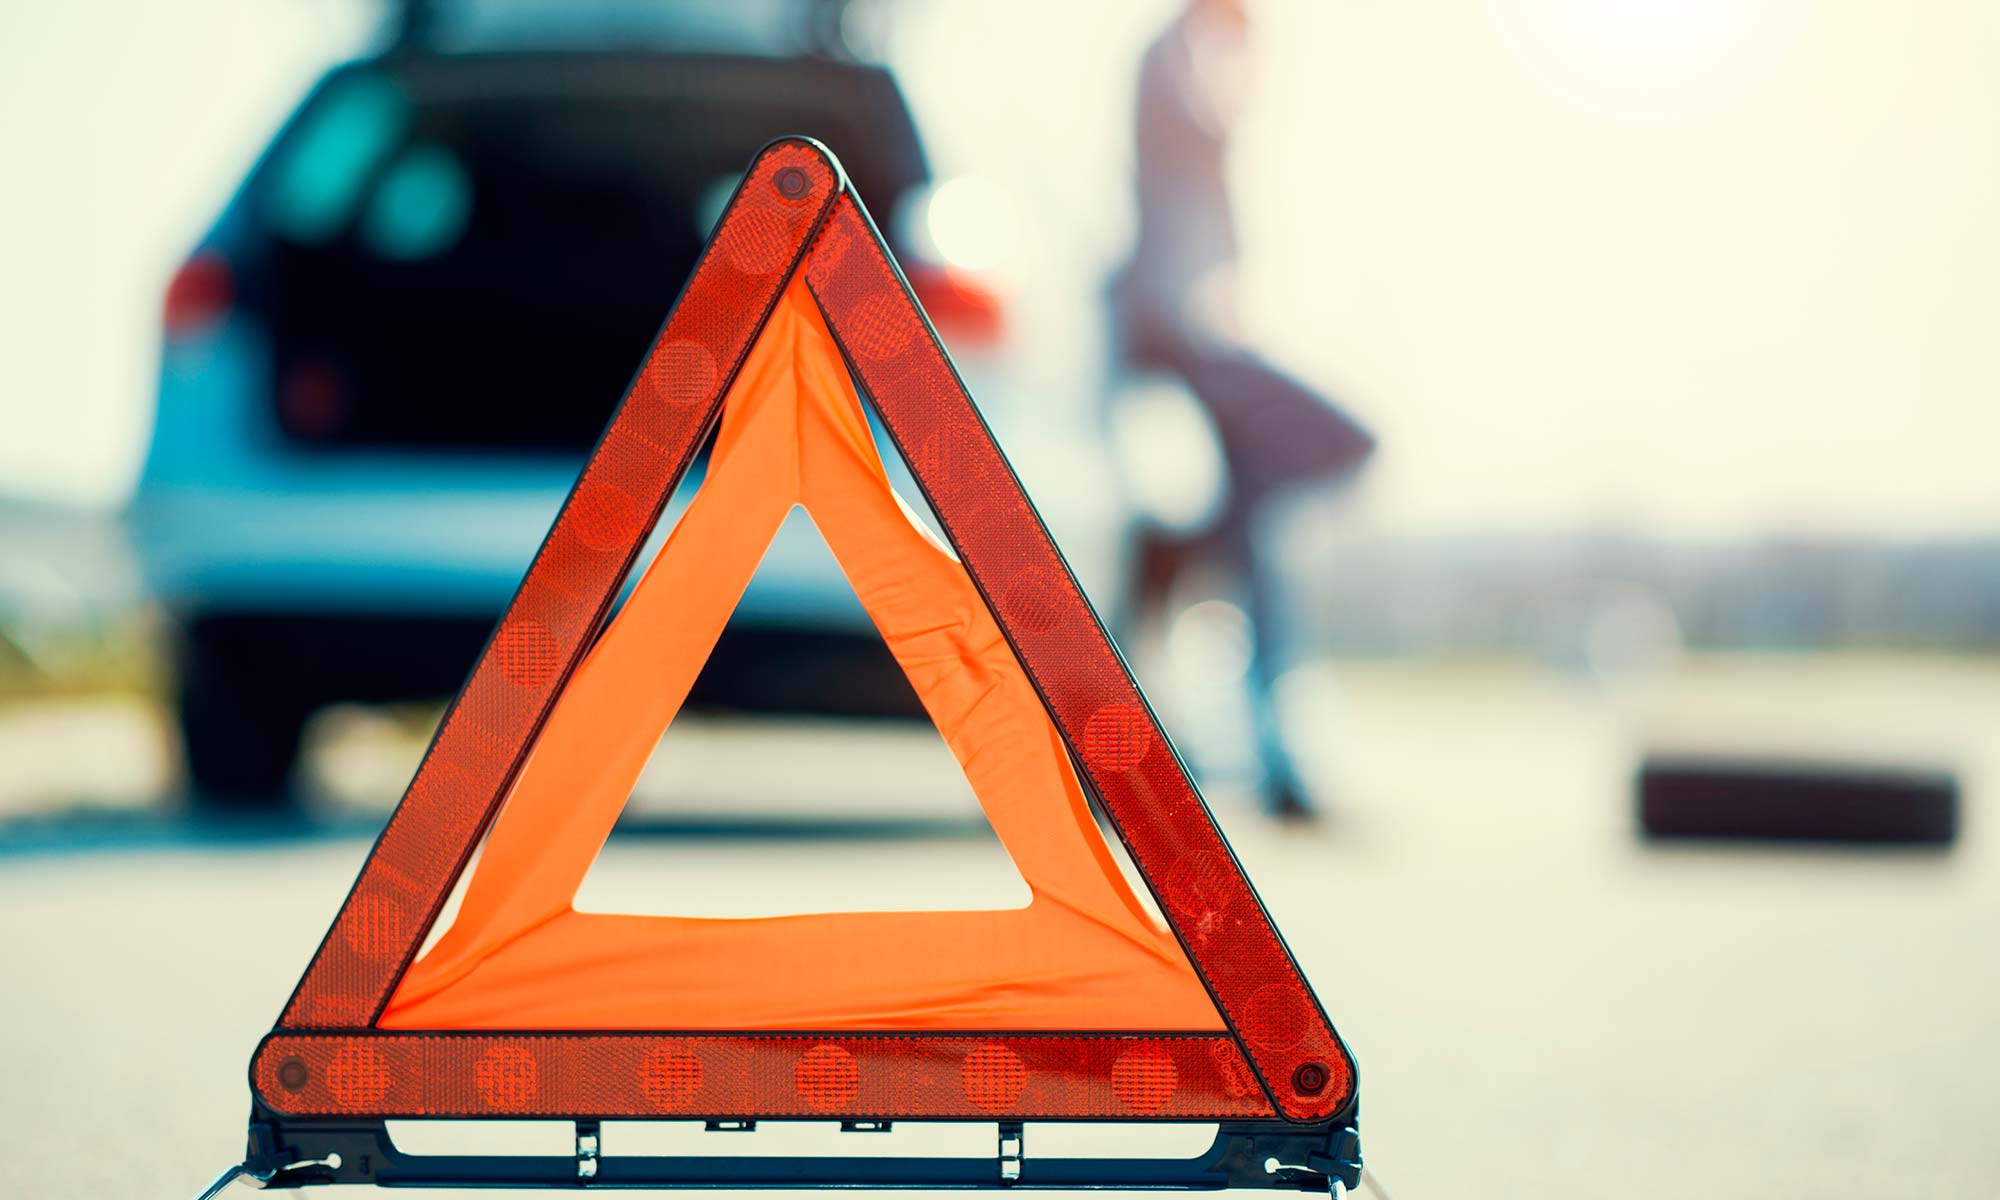 A close up of an orange warning triangle placed on the road in front of a stalled vehicle.